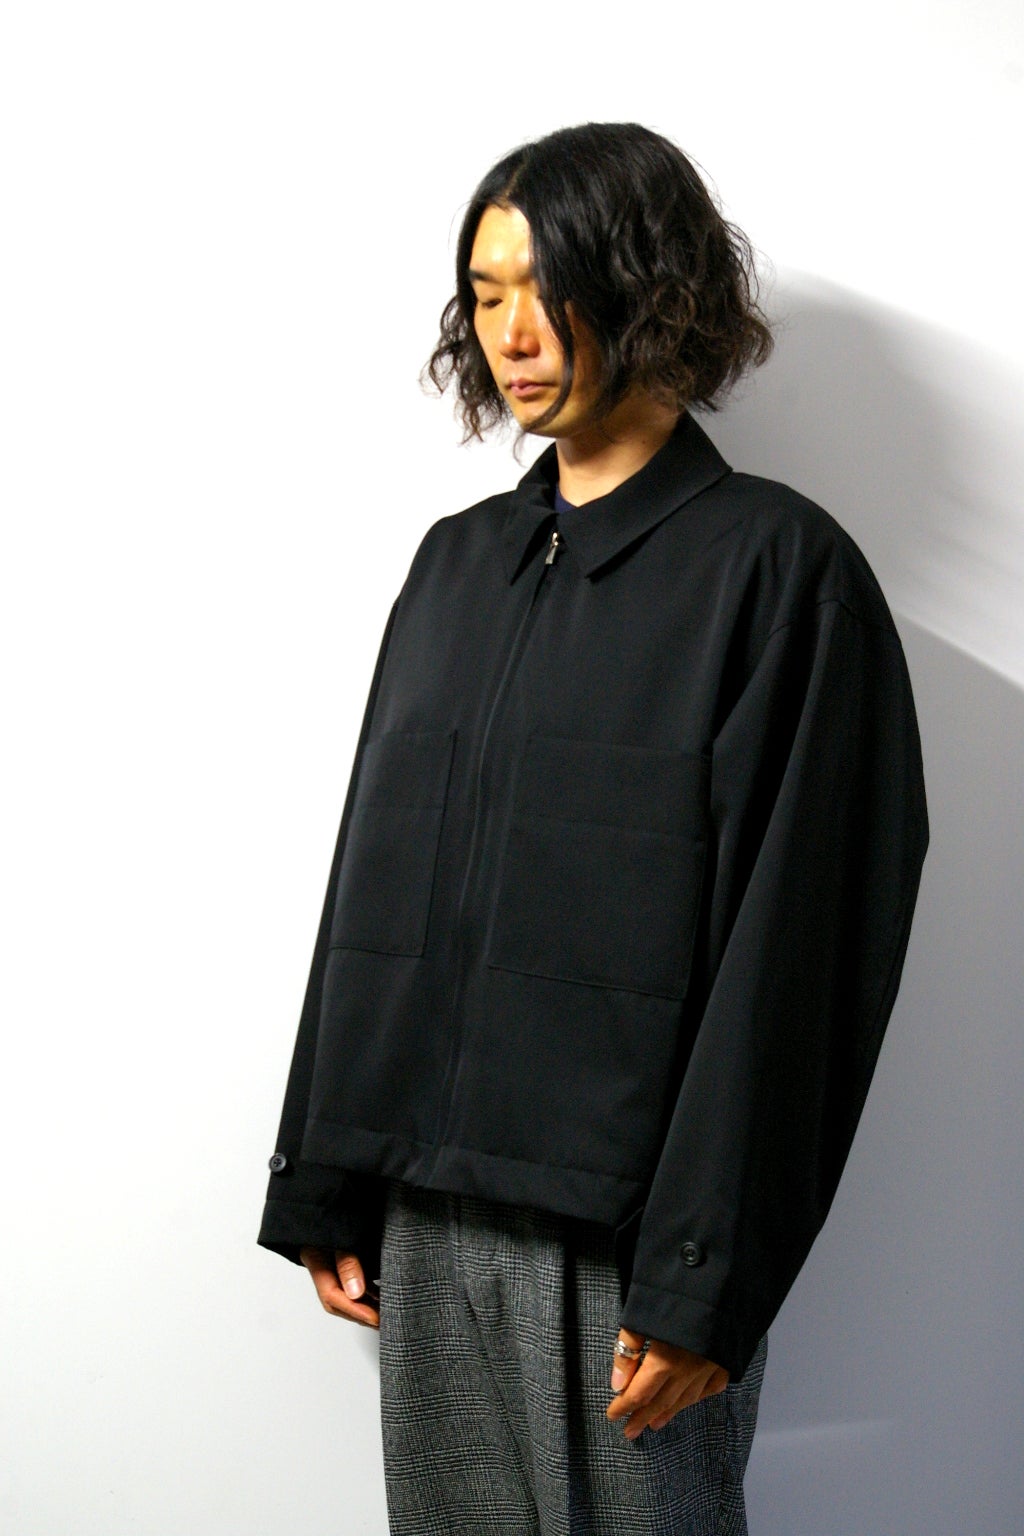 steinシュタイン/OVER SLEEVE DRIZZLER JACKET/Black 通販 取り扱い